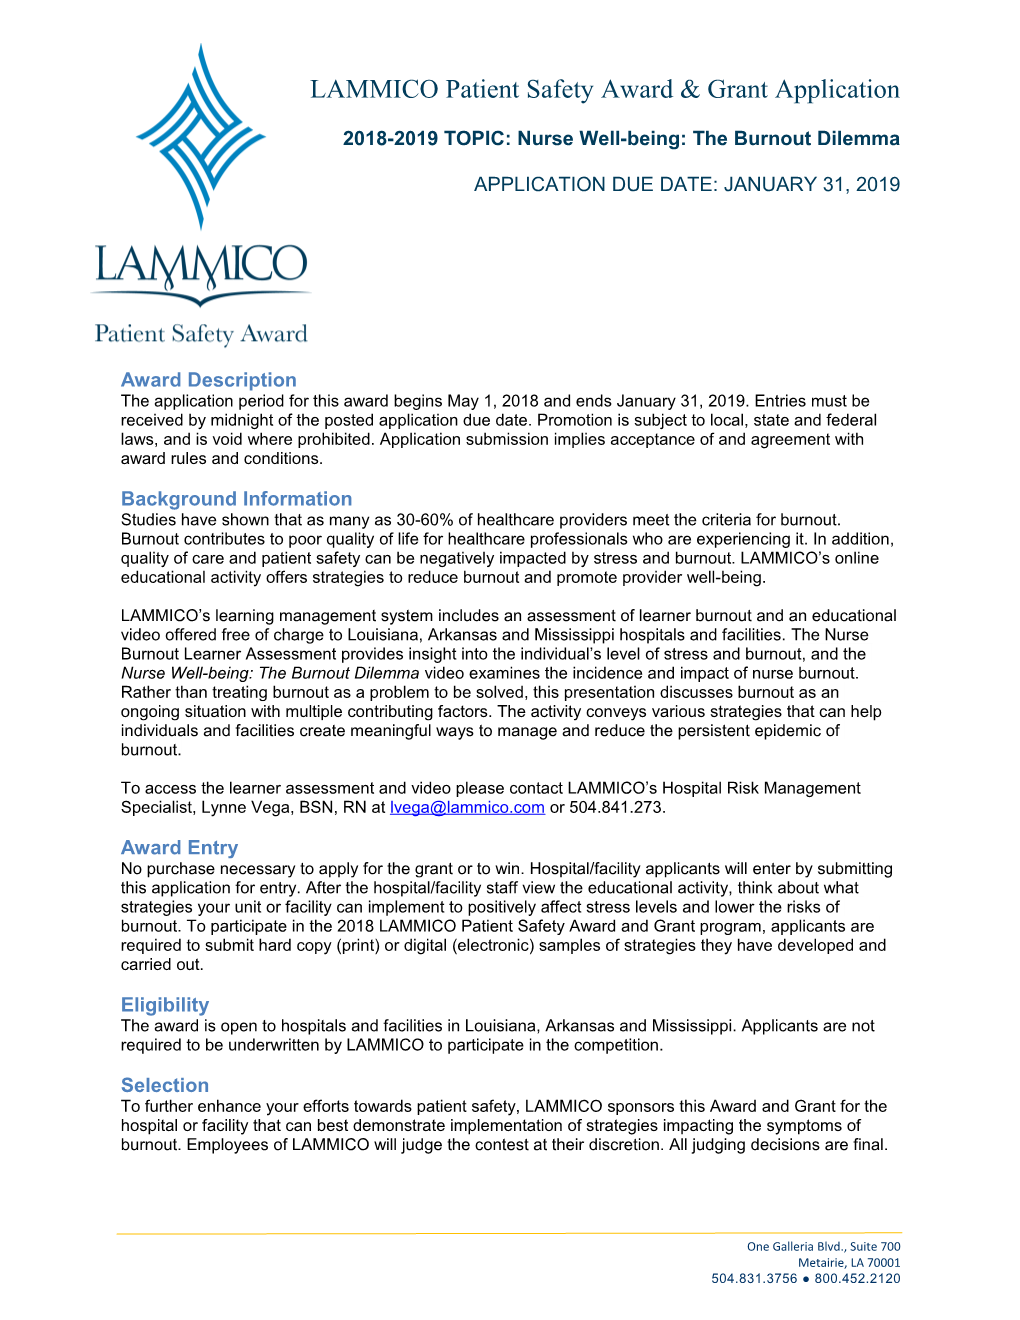 2018-2019 LAMMICO Patient Safety Award & Grant Application